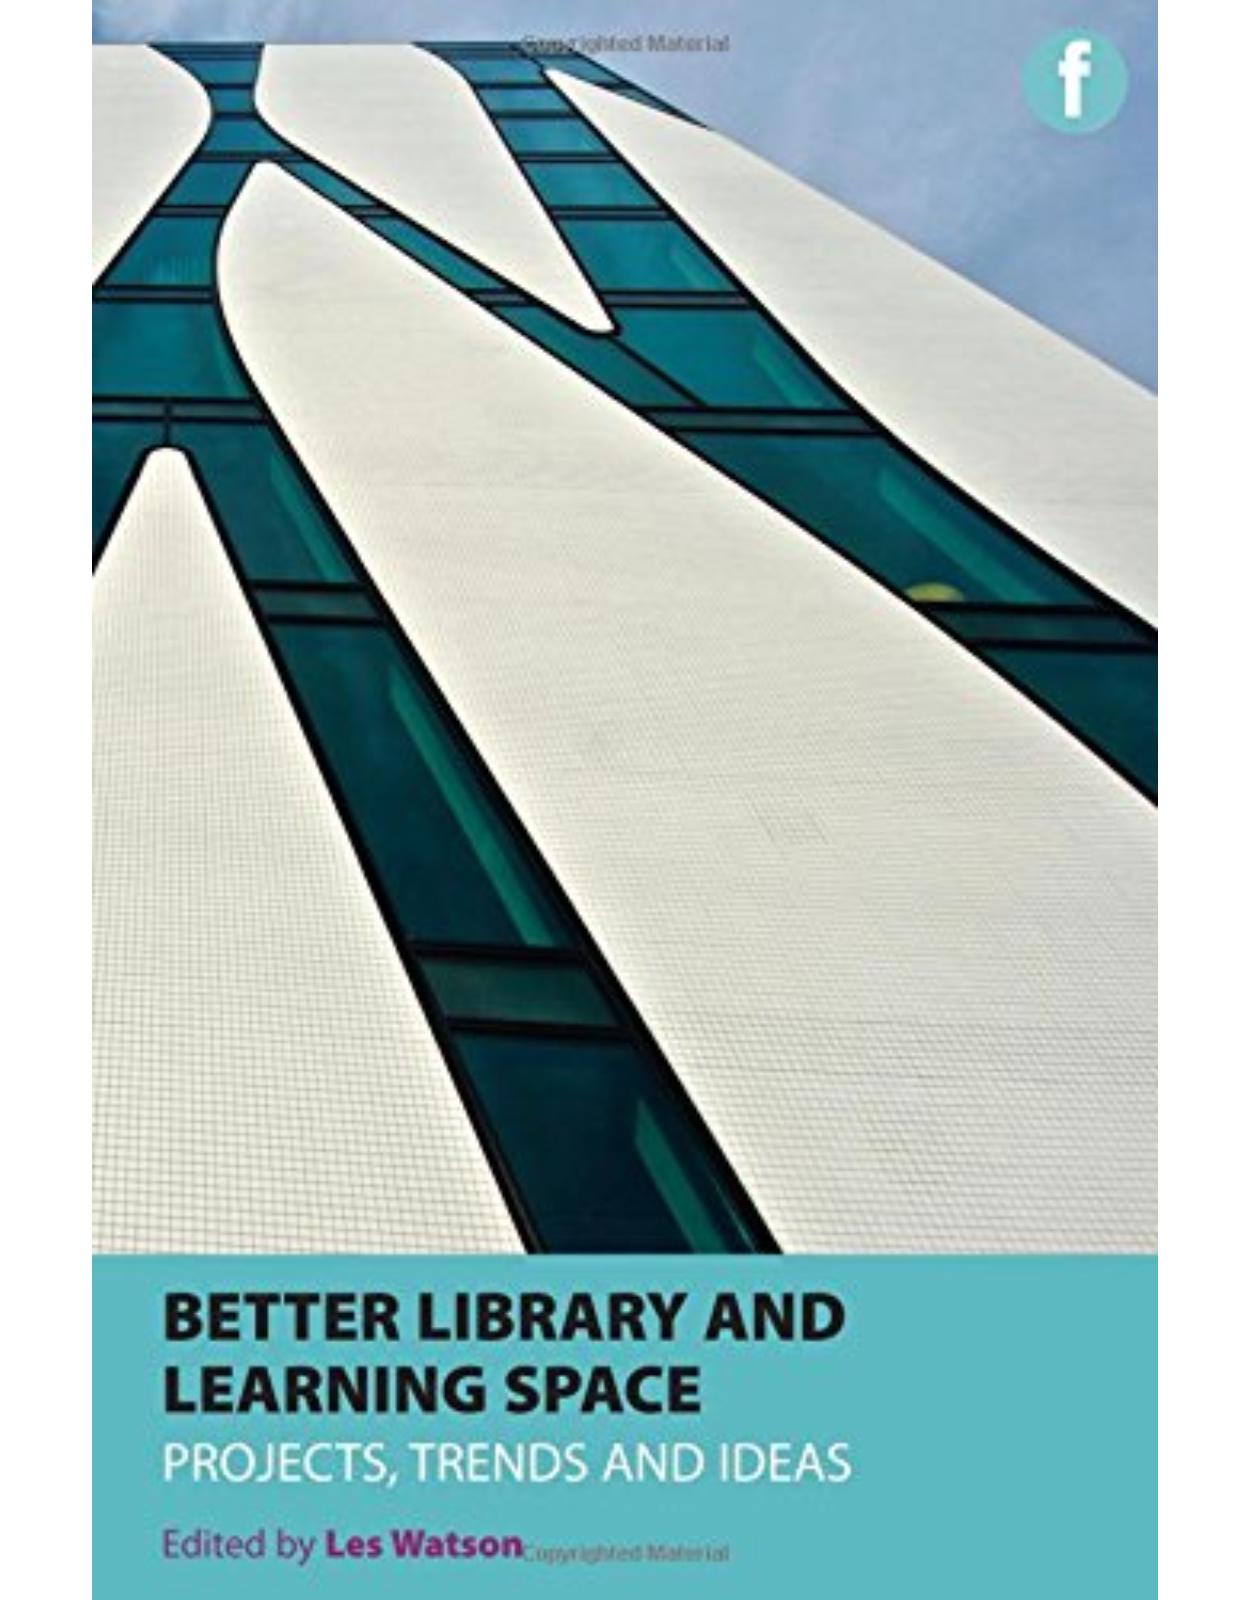 Better Library and Learning Spaces: Project, Trends, Ideas